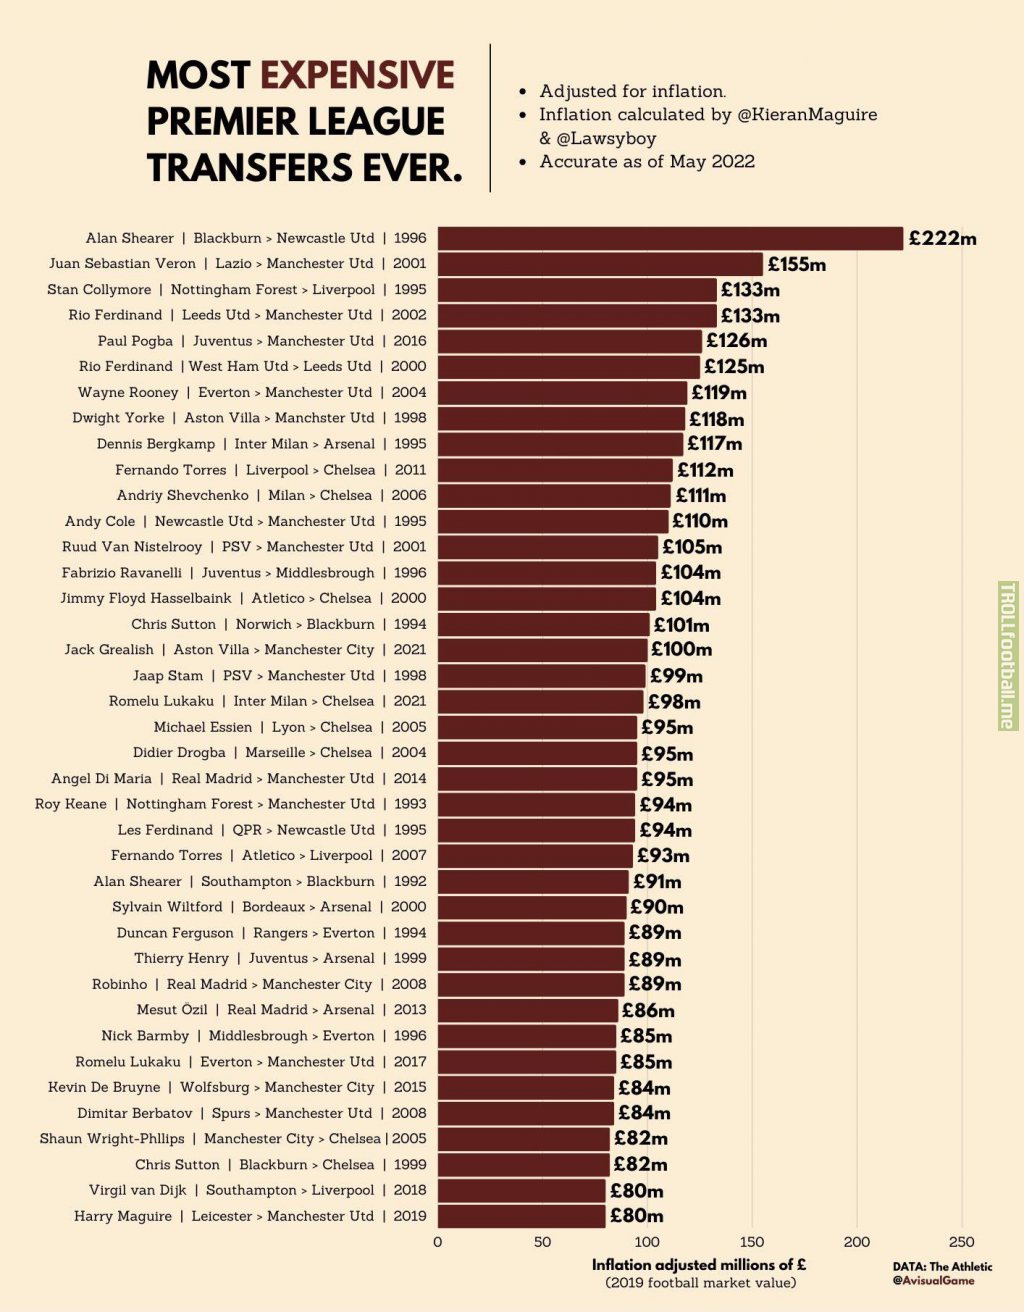 Most expensive Premier League transfers adjusted for inflation